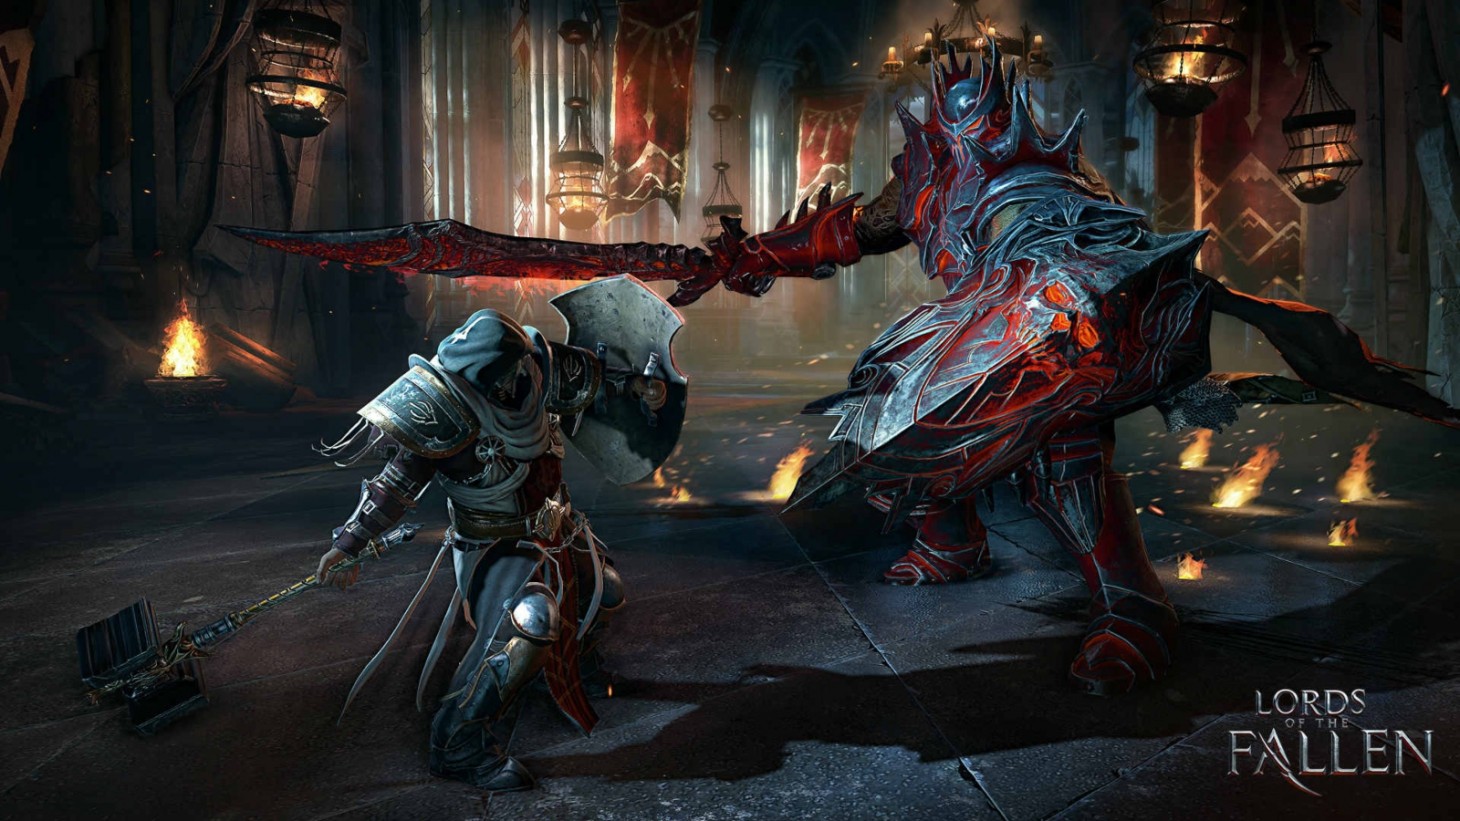 Lords of the Fallen 2 confirmed